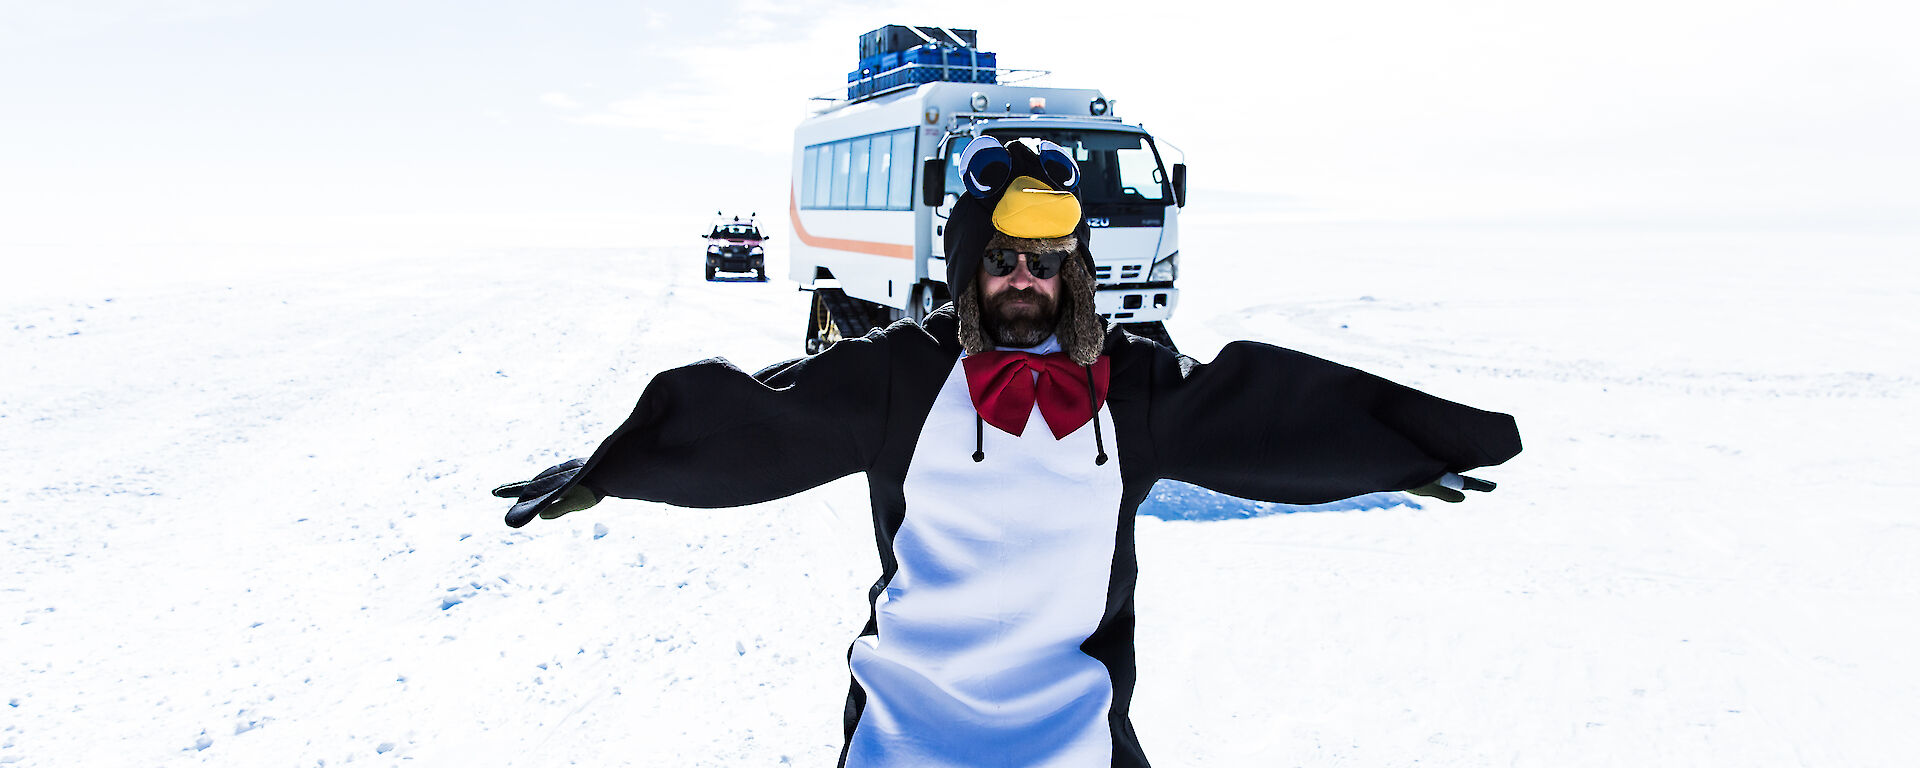 Man with beard and sun glasses dressed in penguin outfit in foreground with tracked white and orange bus behind.